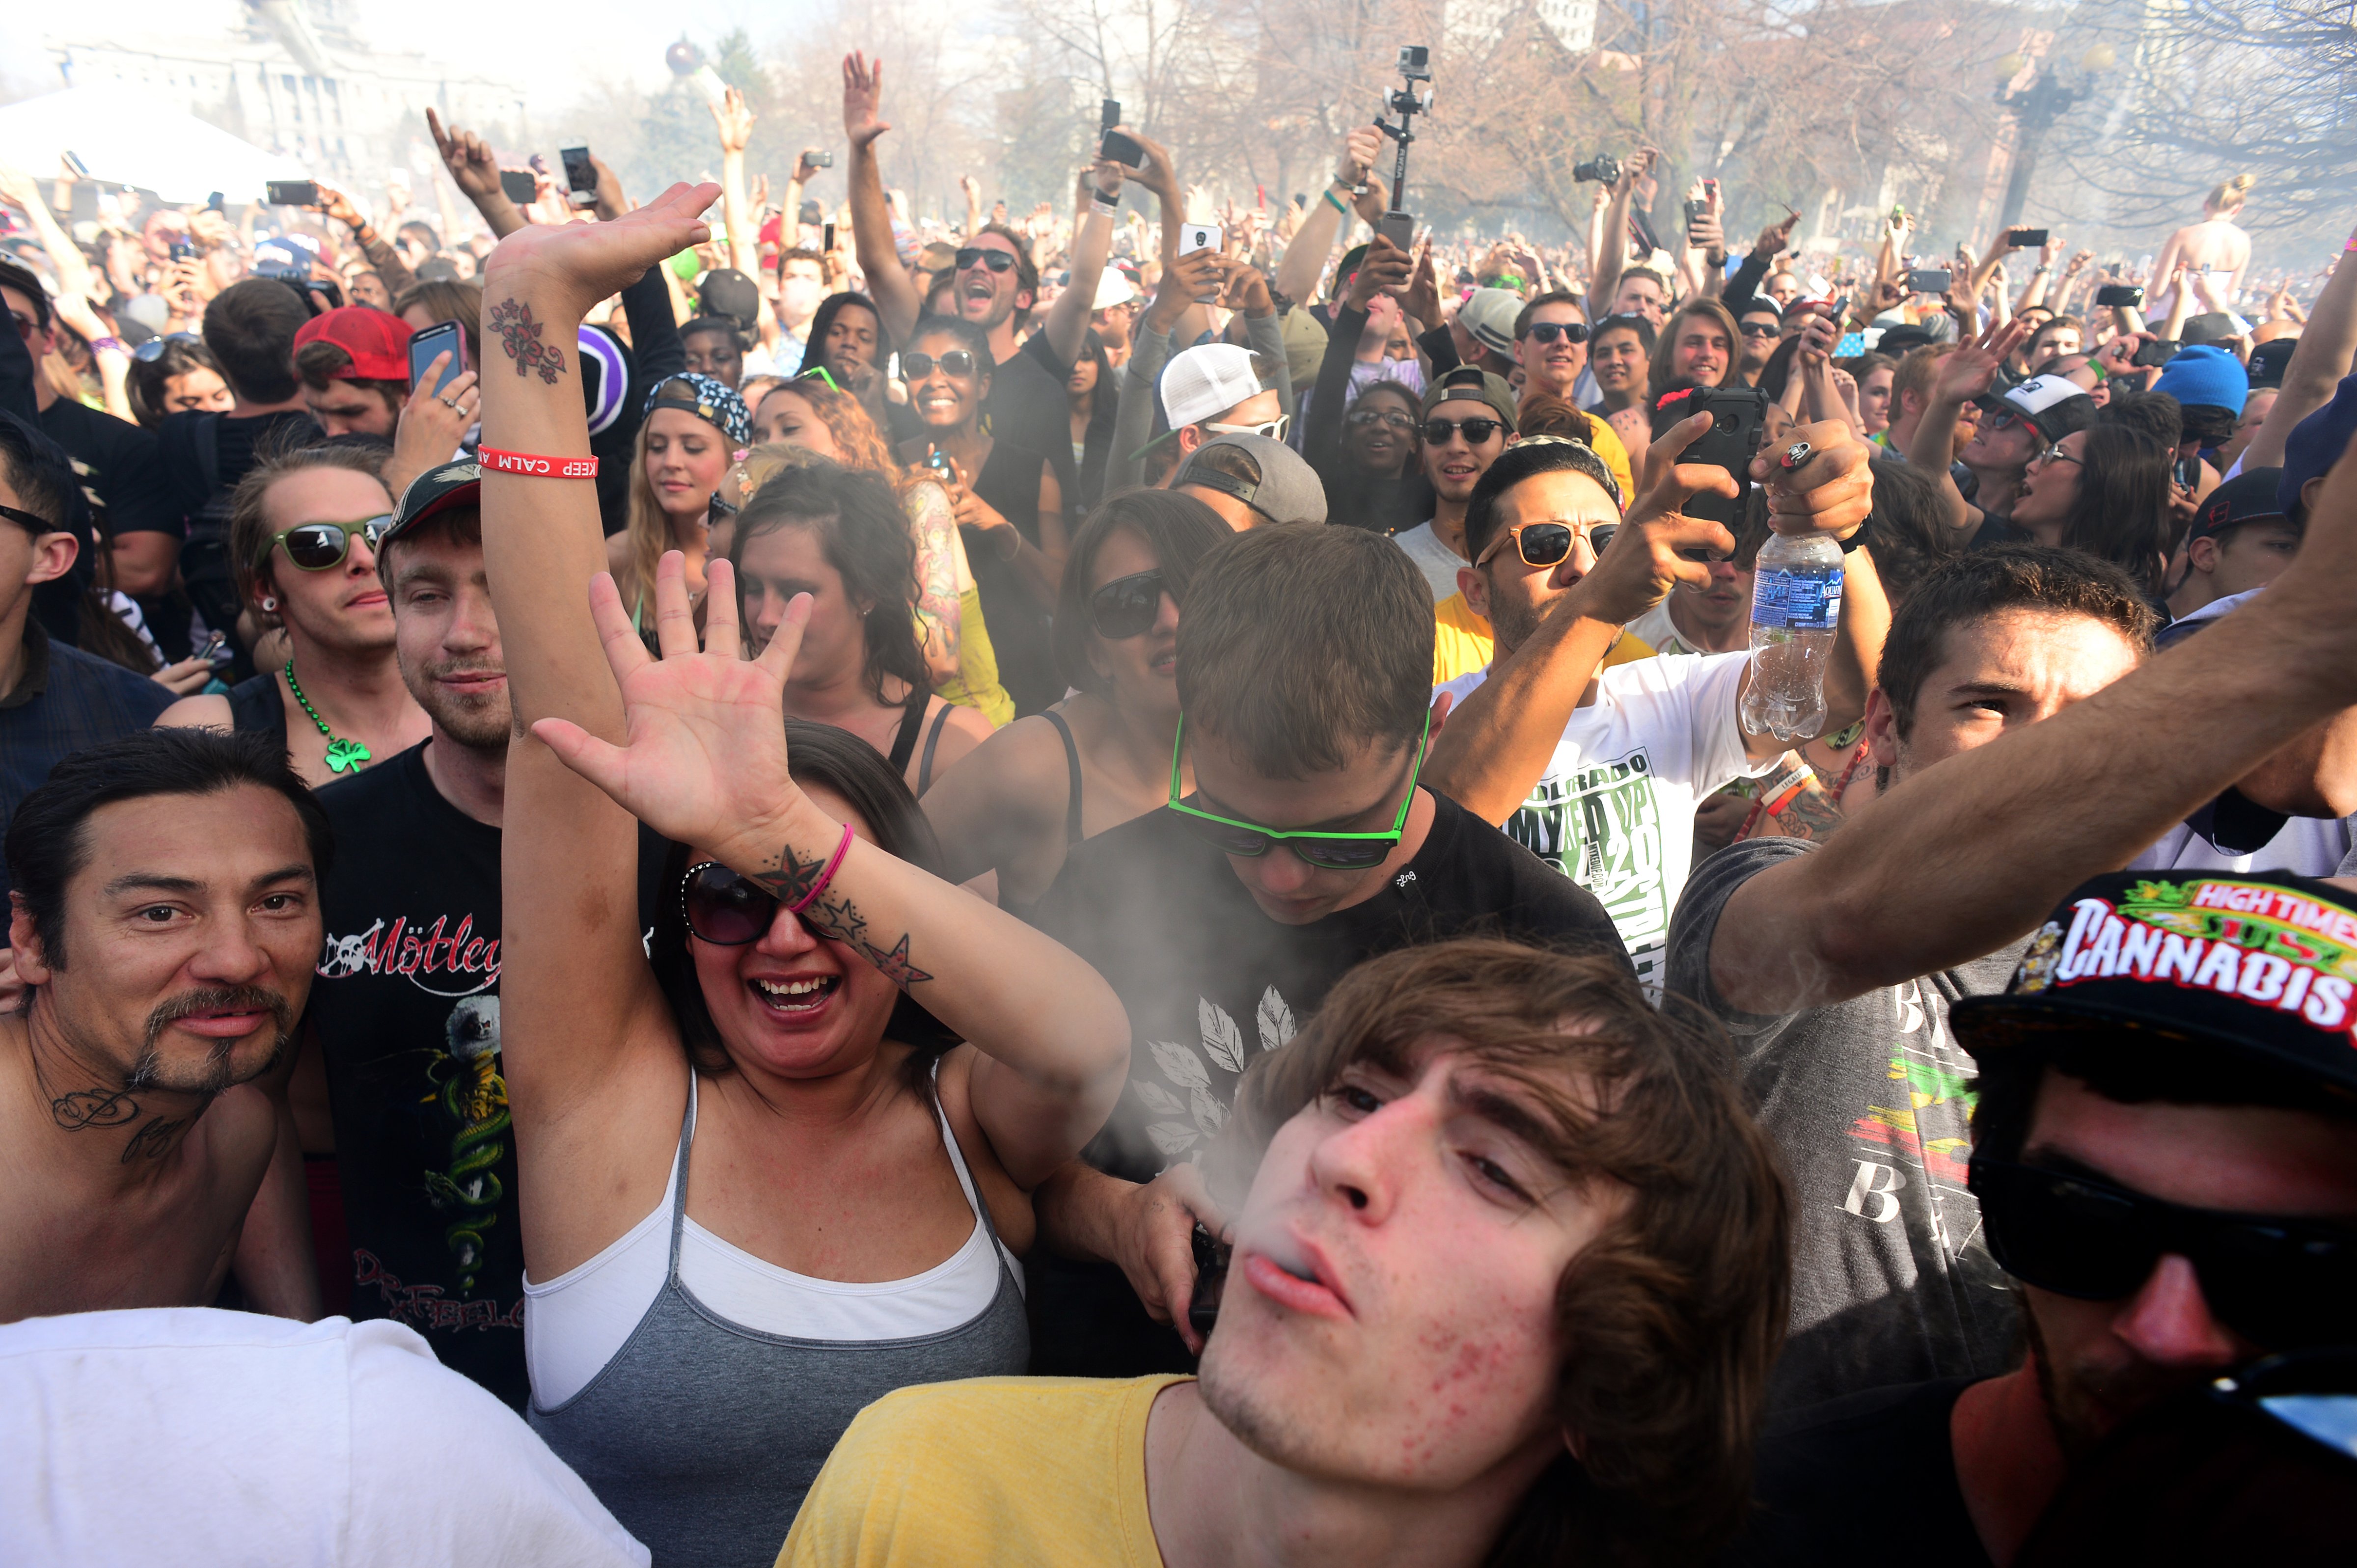 Hundreds of people lit up joints, bongs, pipes and marijuana cigarettes at exactly 4:20 p.m. during the Colorado 420 Rally at Civic Center Park in Denver on April 20, 2014, to celebrate the legal use of marijuana in the state. (Helen H. Richardson—Denver Post via Getty Images)